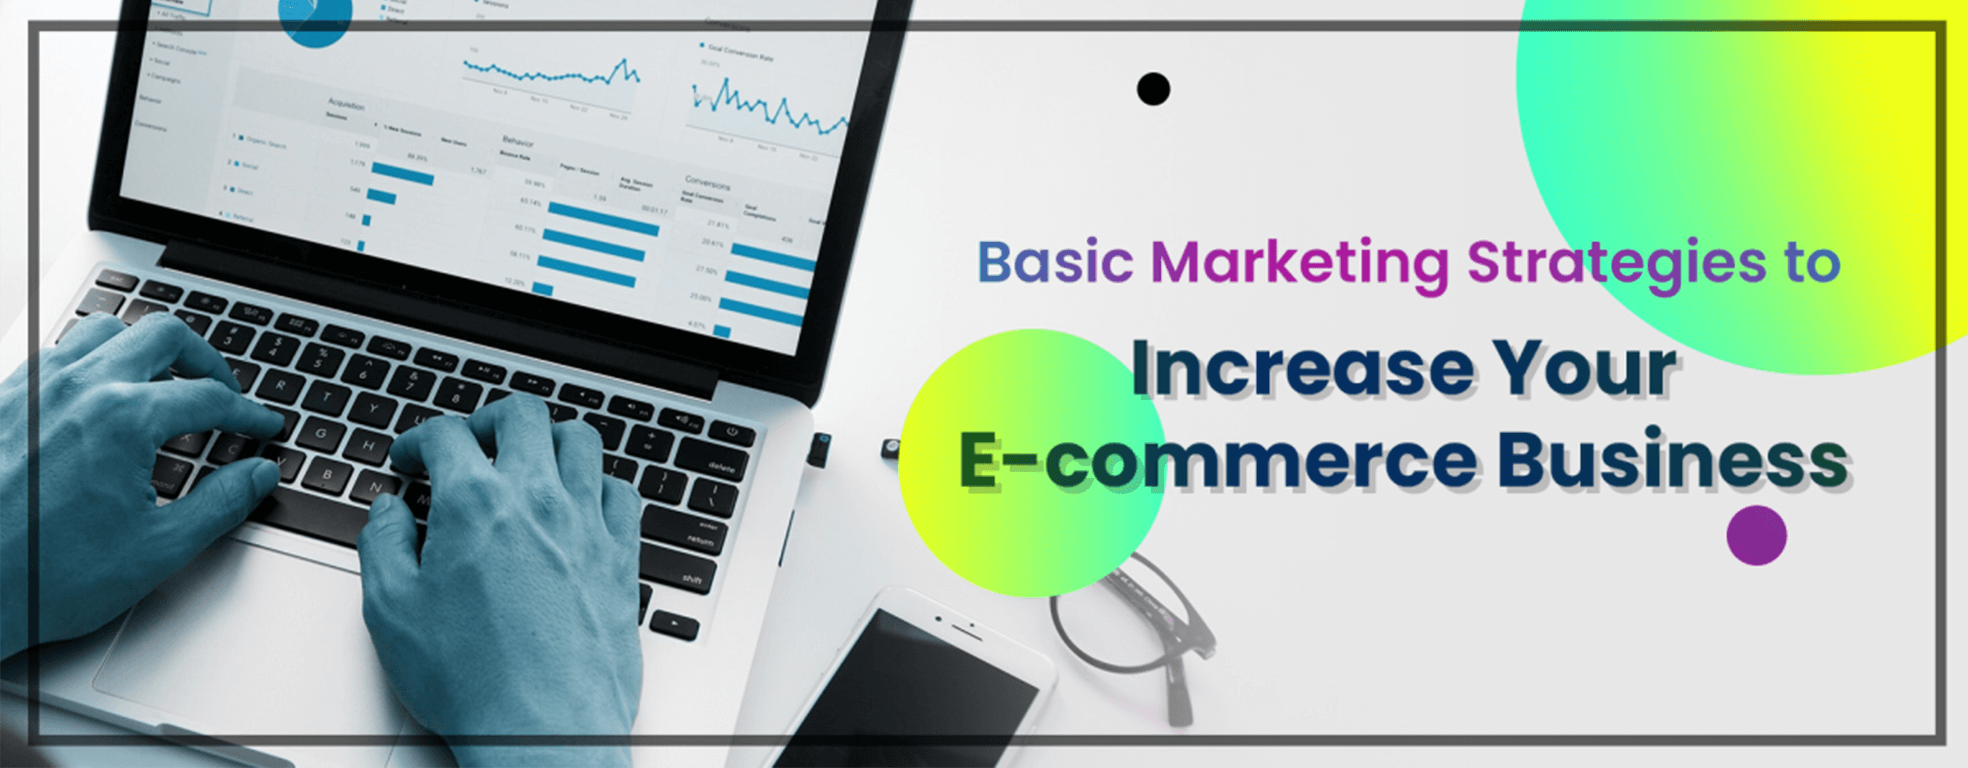 Basic Marketing Strategies to Increase Your E-commerce Business